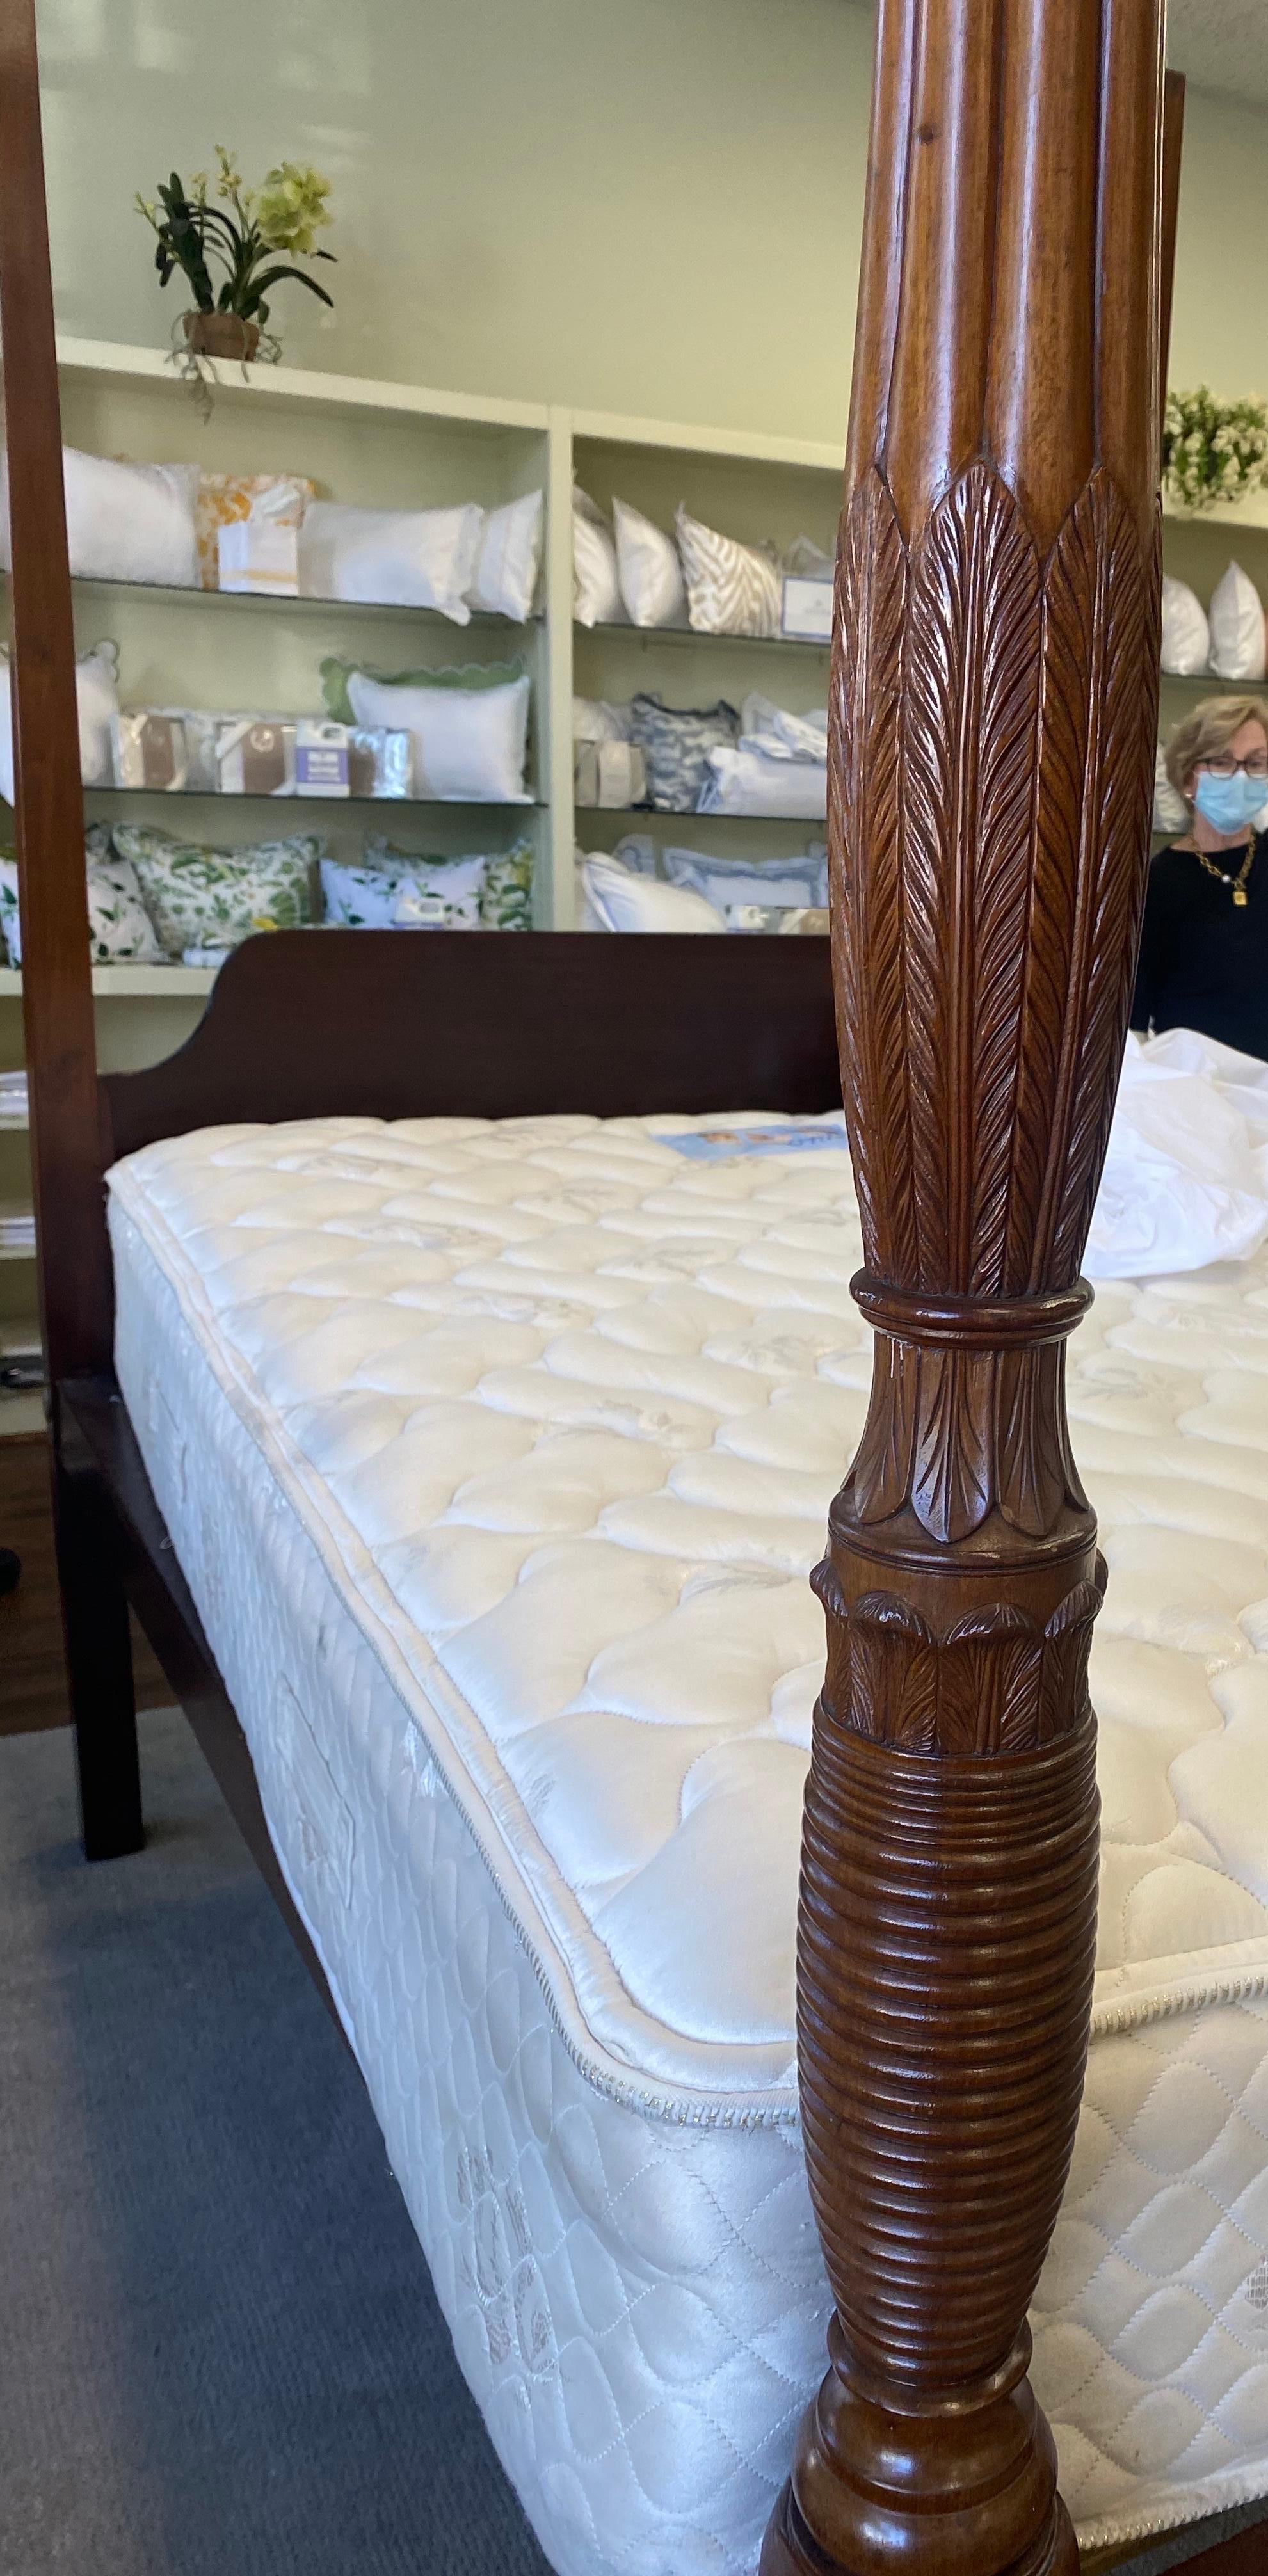 Great 18th century period four post mahogany bed, likely Charleston. Great quality hand carved feathers and ring turnings on posts.

Has been converted to fit a queen size mattress.